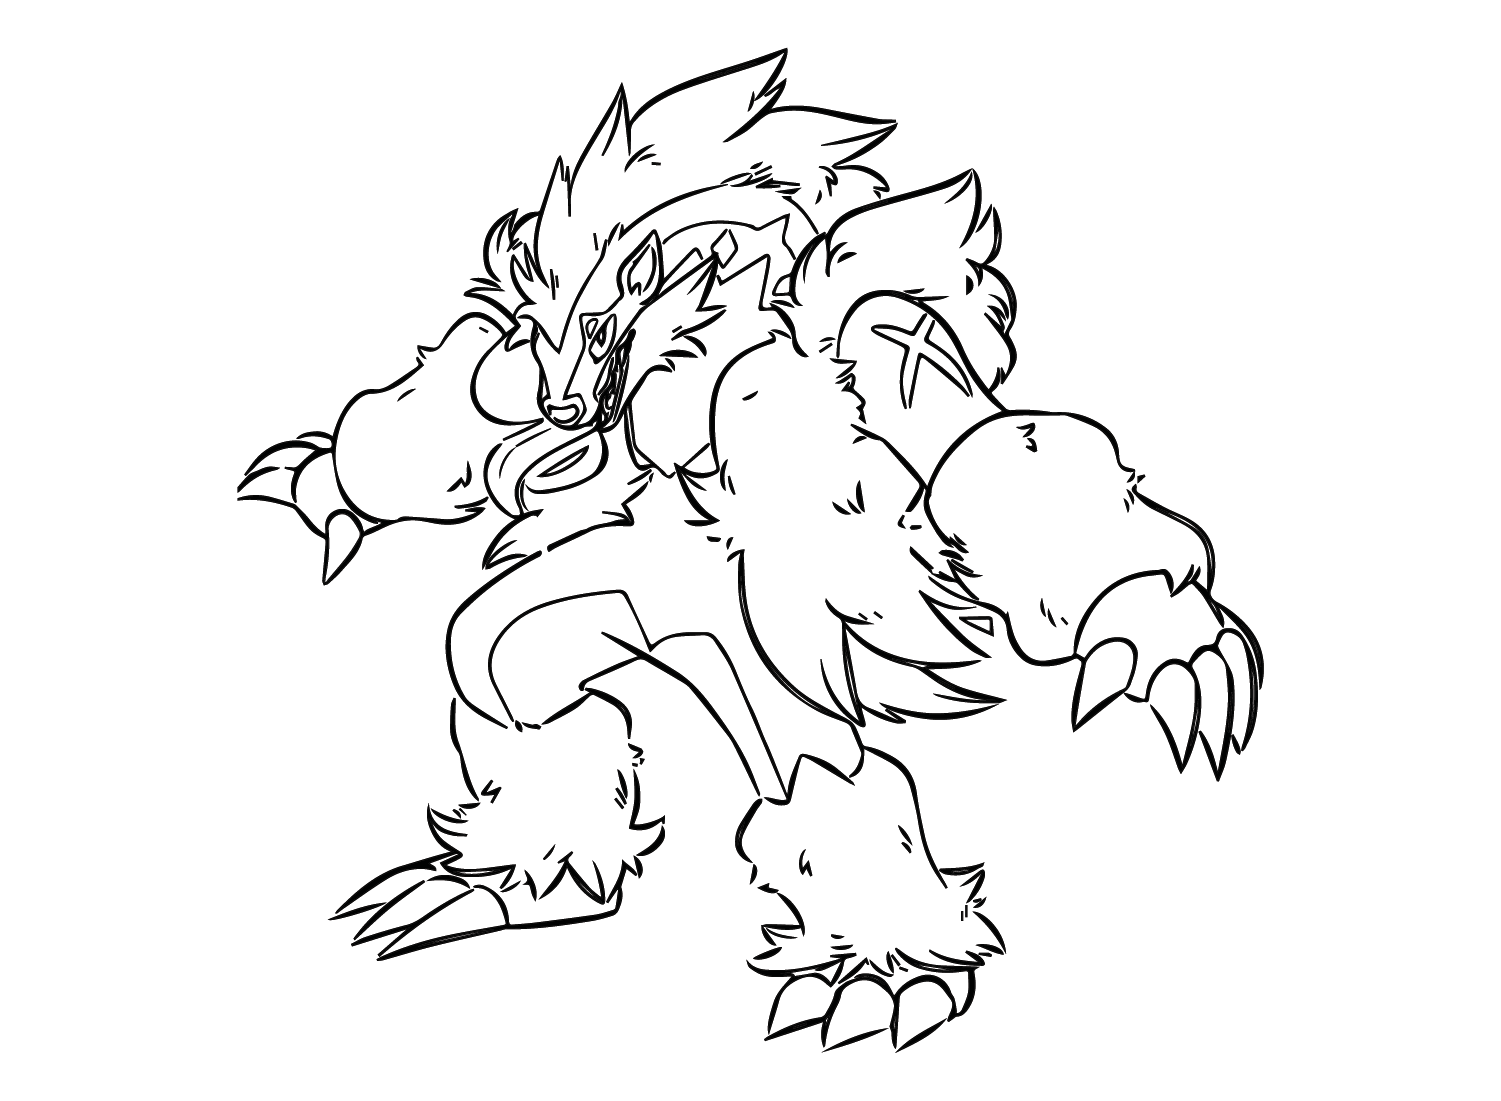 The Obstagoon from Obstagoon